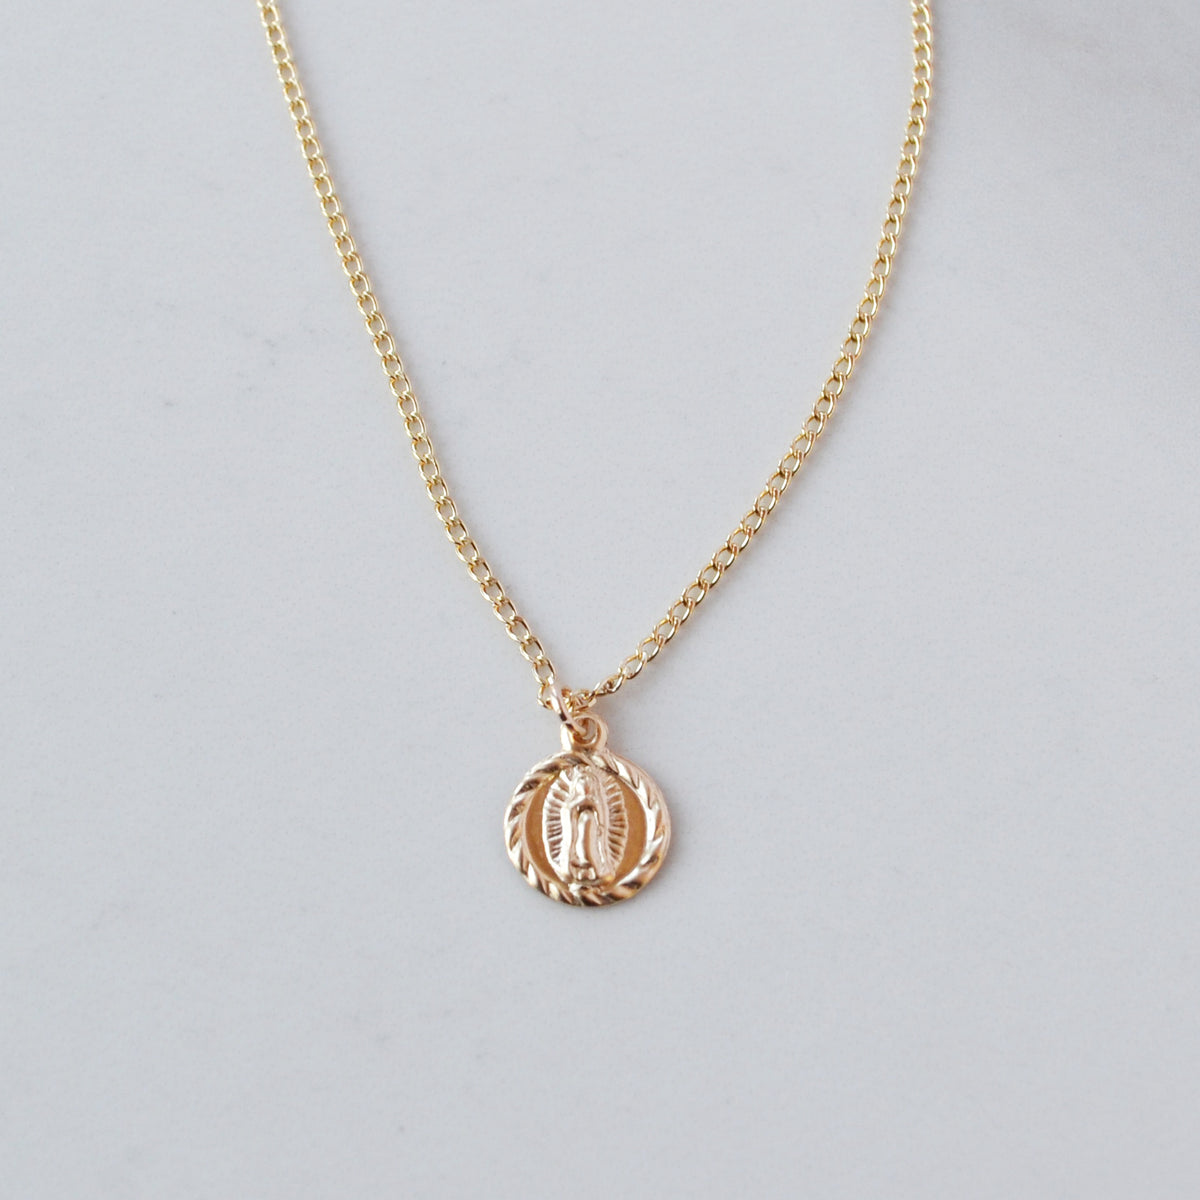 Lady of Guadalupe Charm Necklace